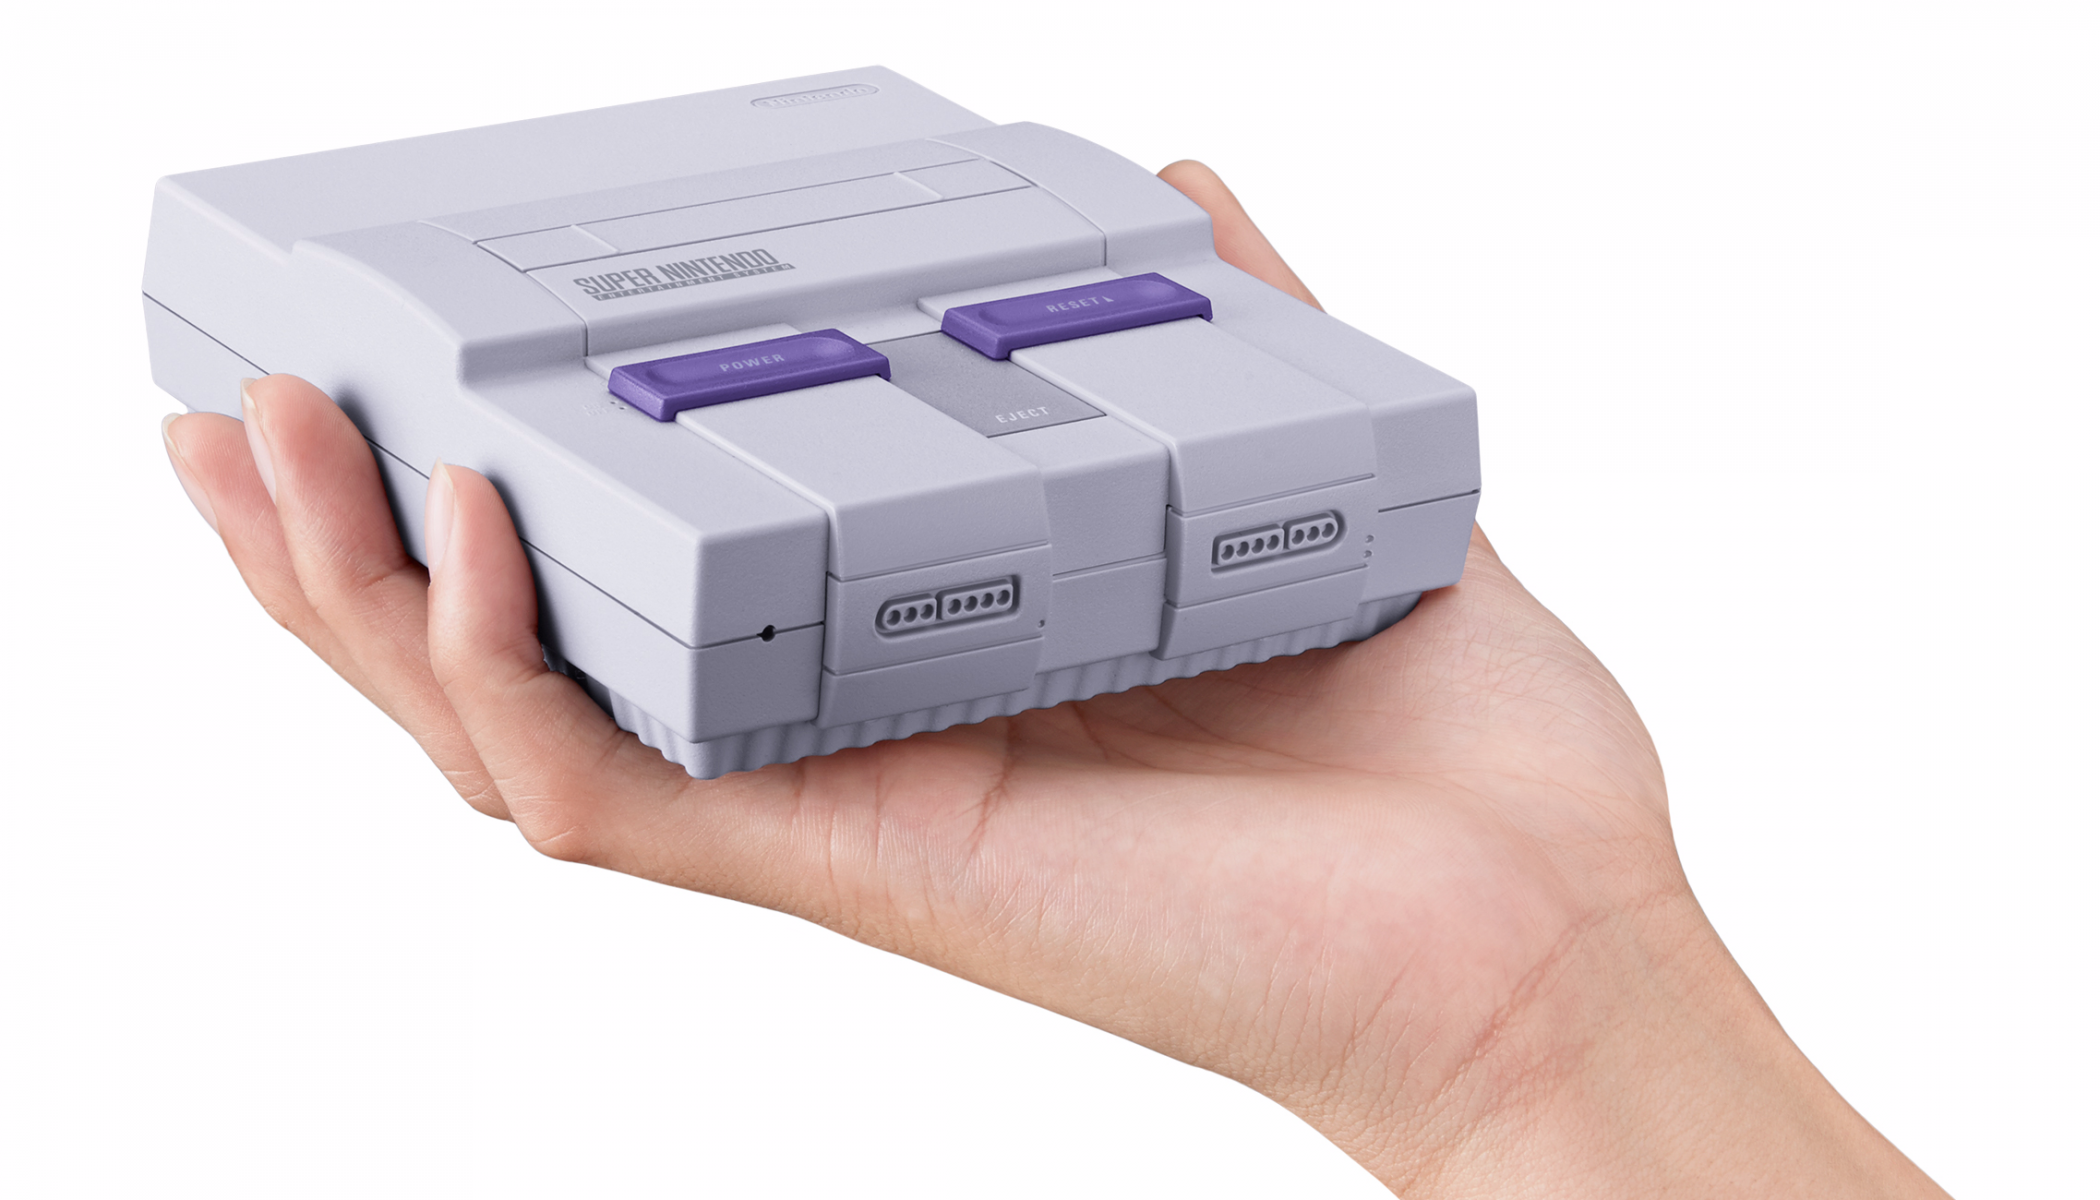 Super Nintendo Classic Edition Will Come Out Sept. 29, Mini SNES Will Retail for About $80